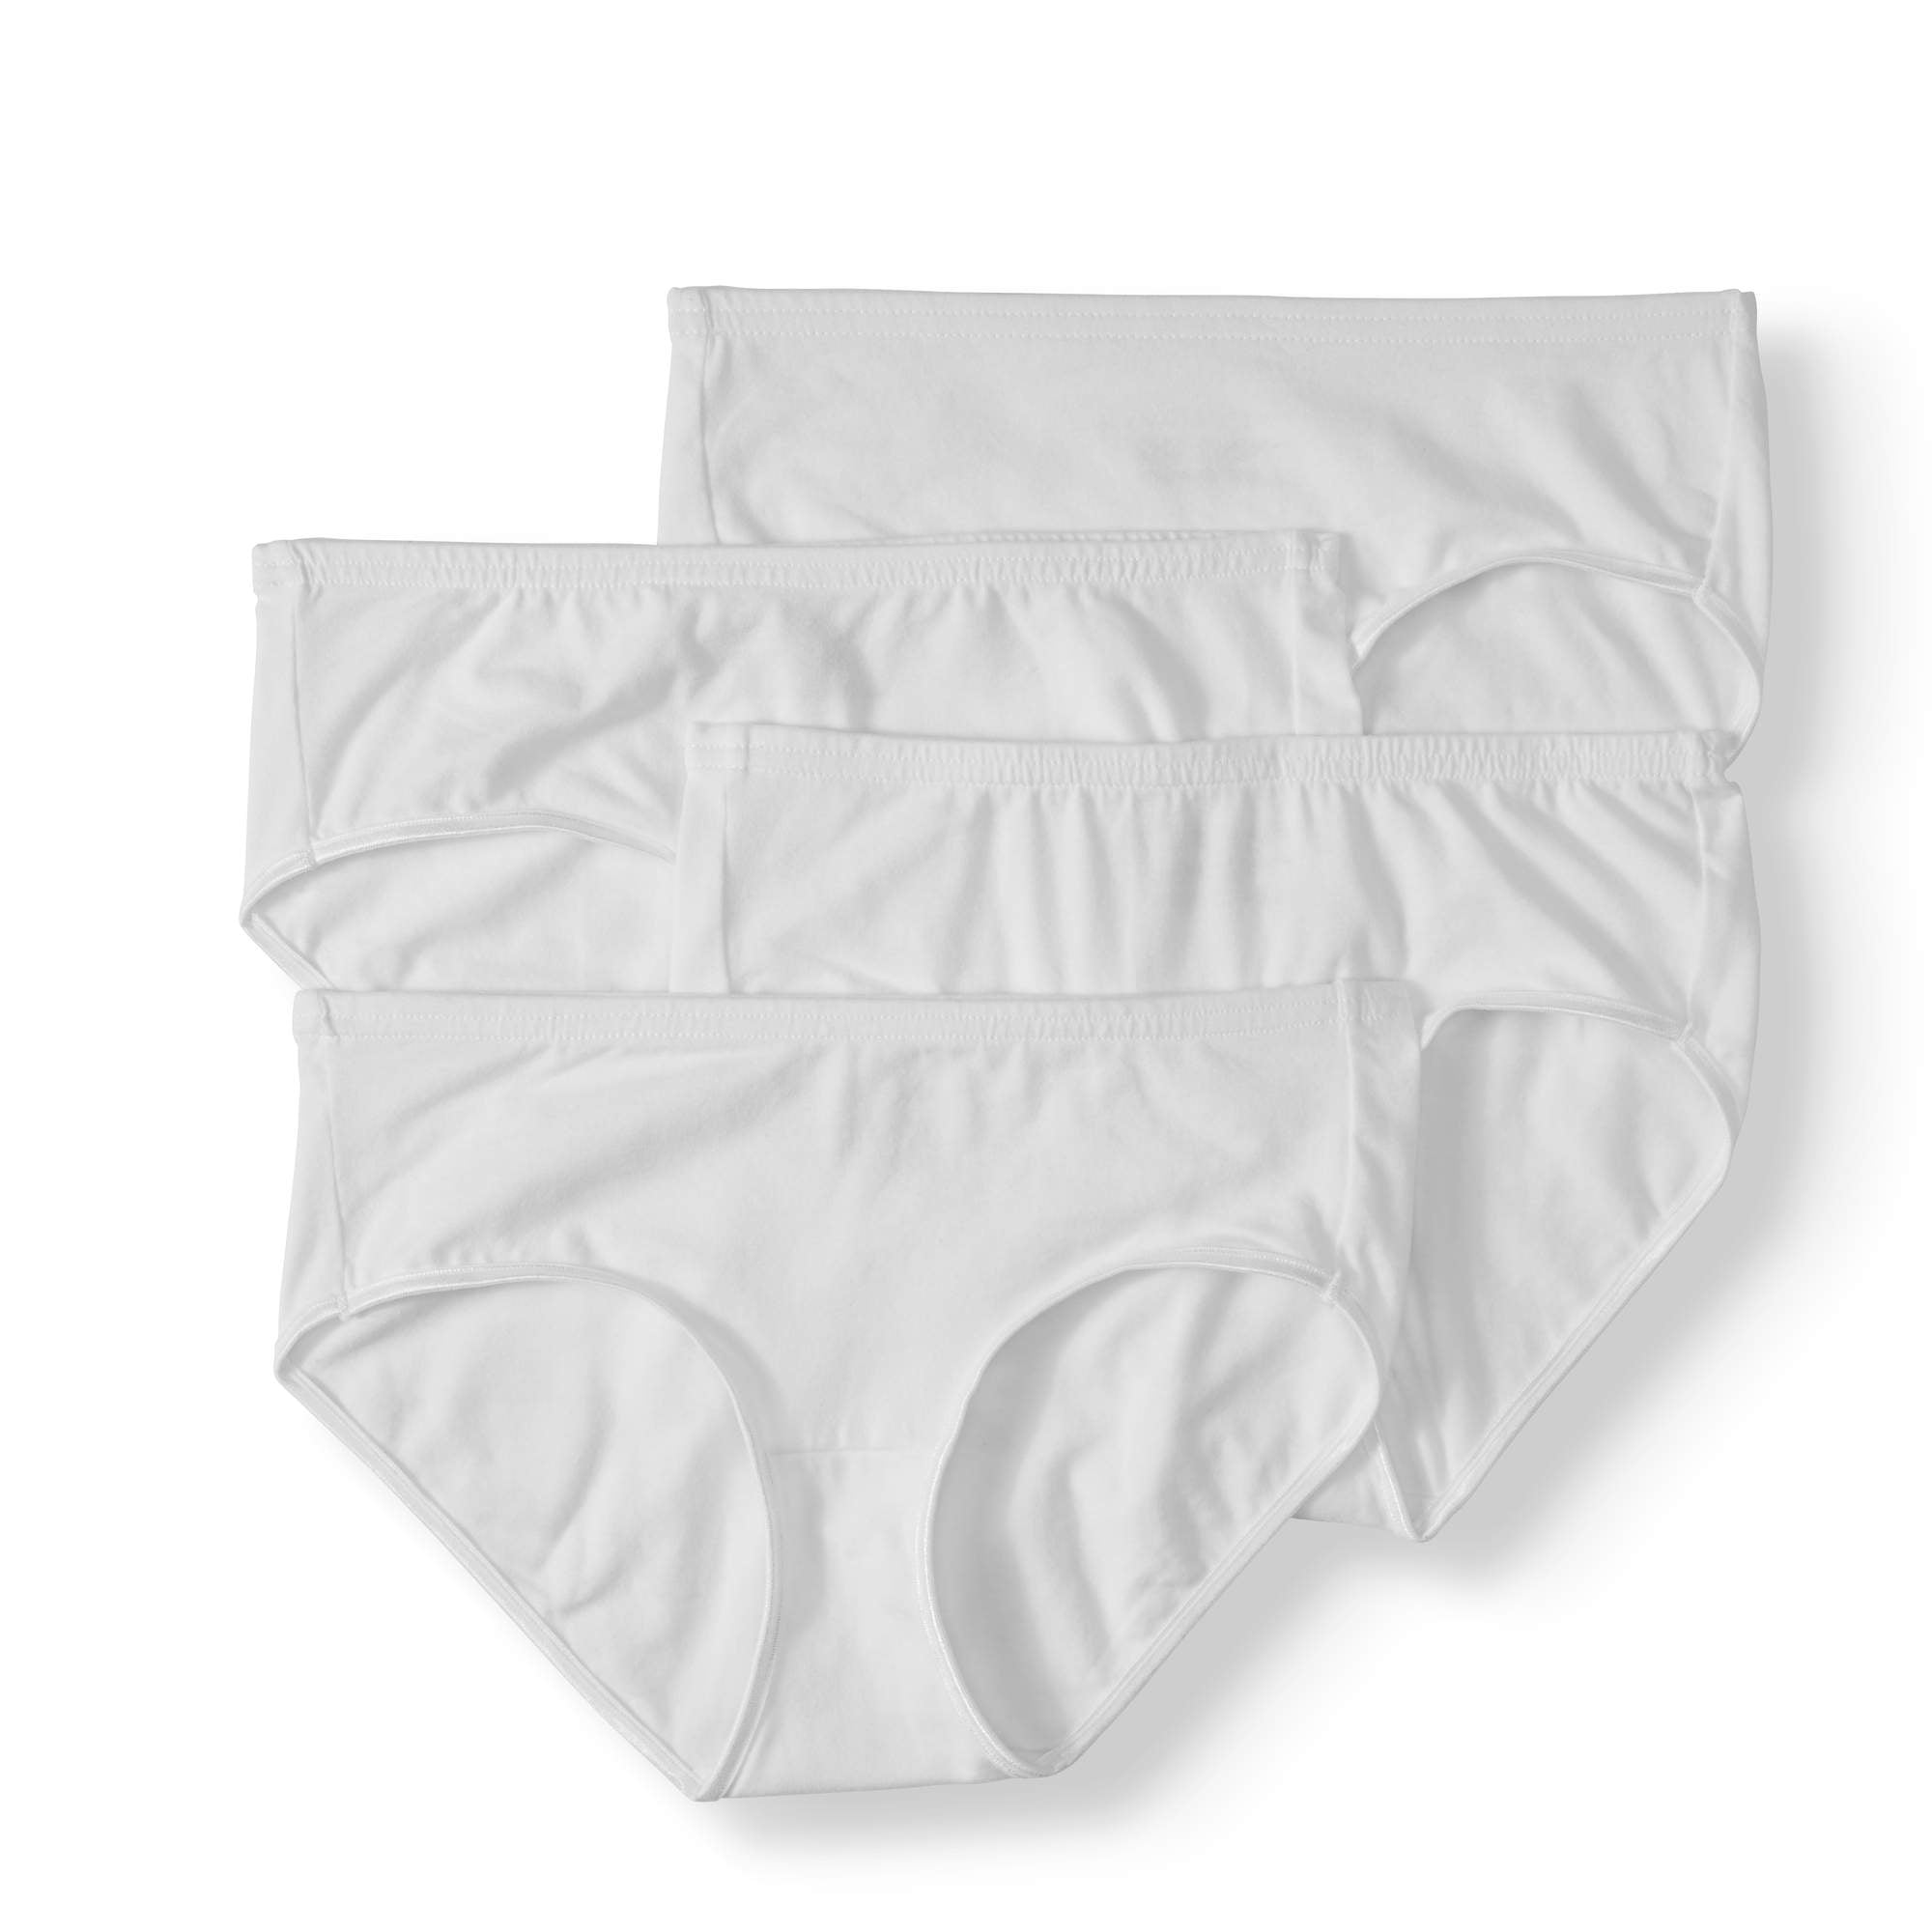 Best Fitting Panty Women's Cotton Stretch Hipster Panties, 4-Pack 